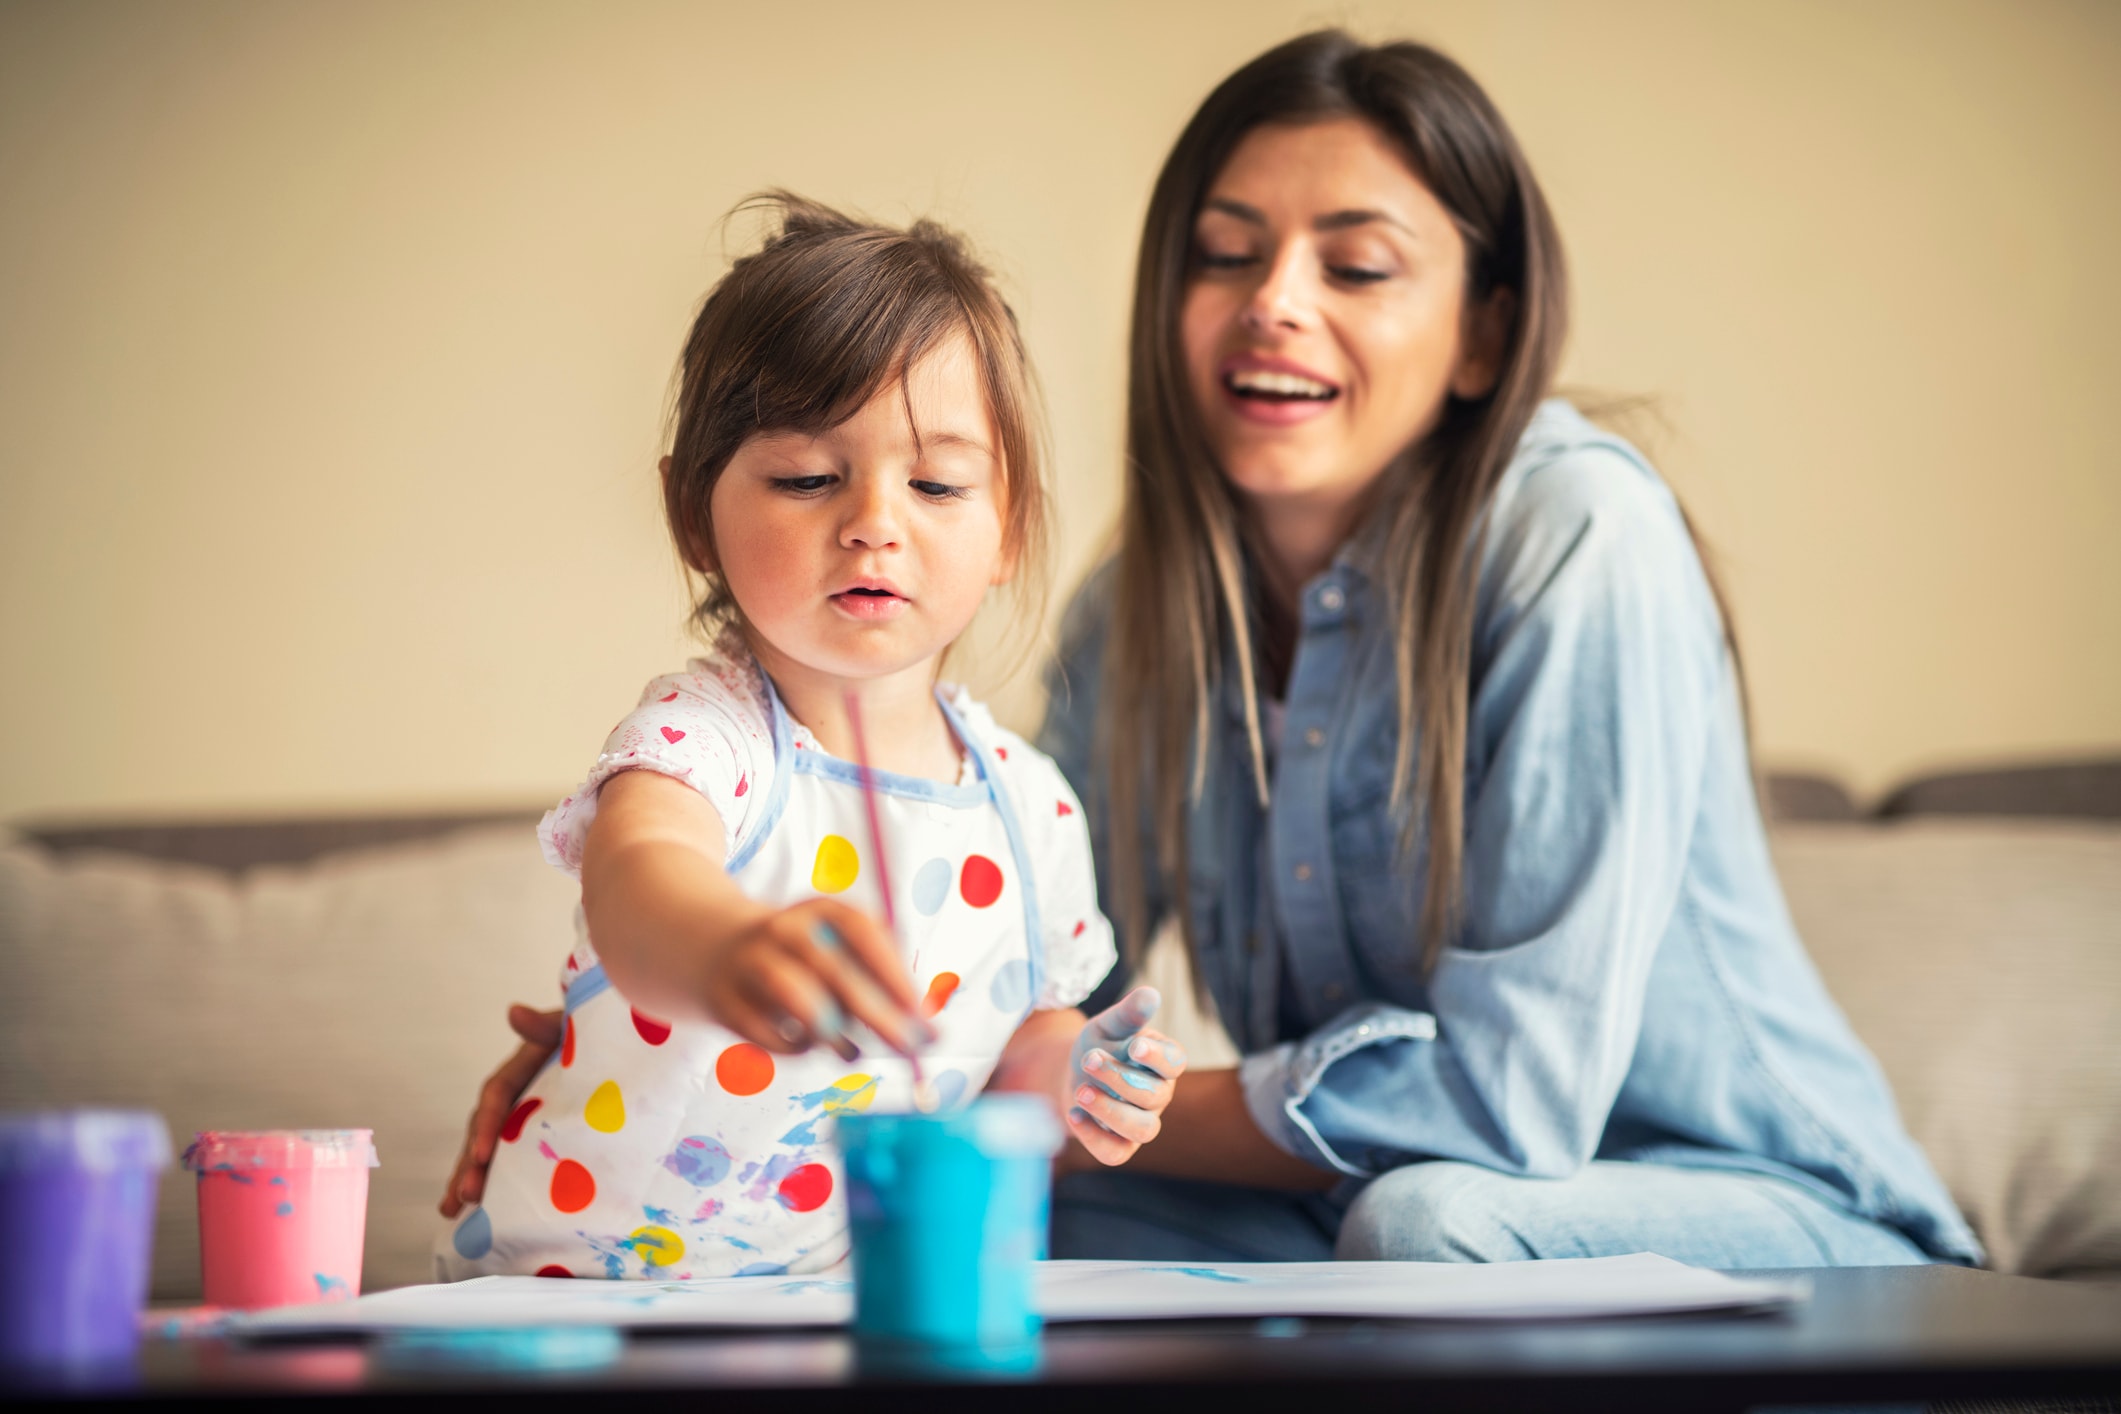 How to provide child care while parents are home and make it work